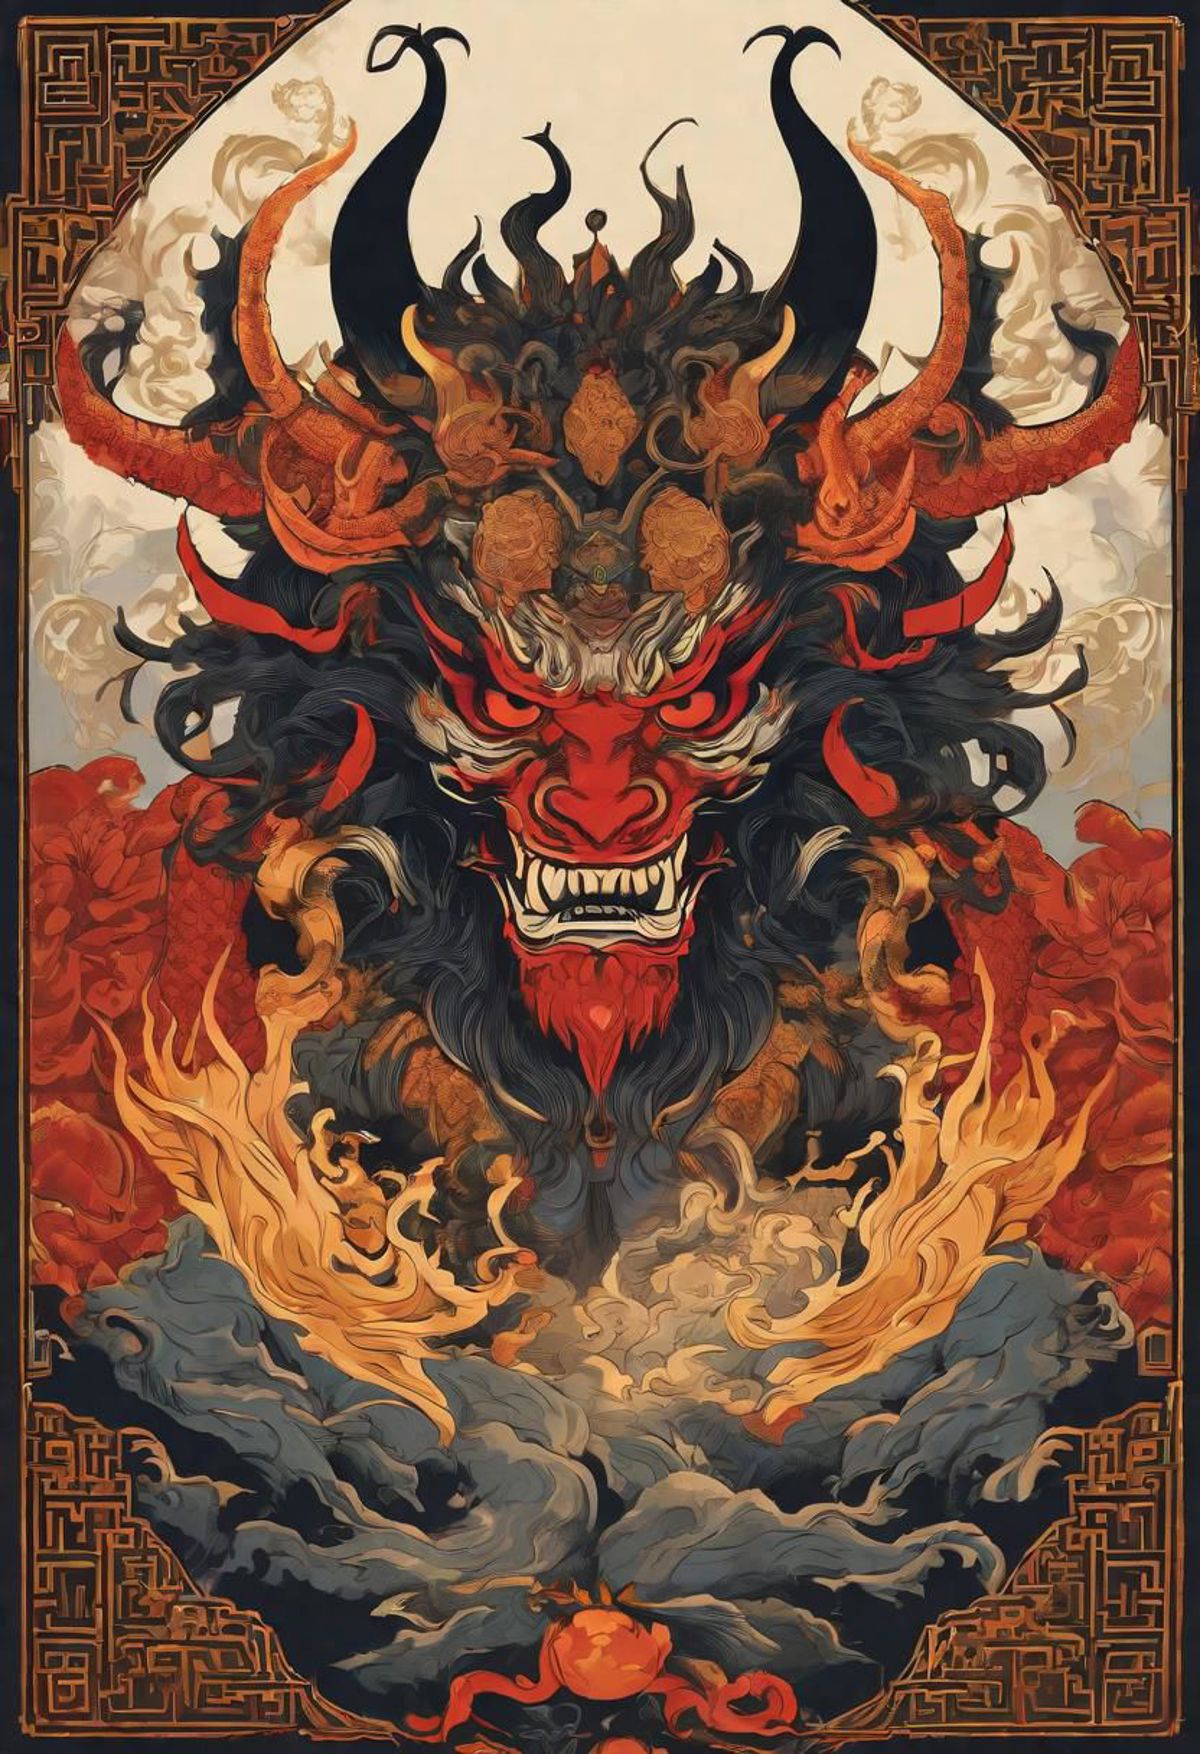 A fierce dragon with red eyes and horns, surrounded by flames.